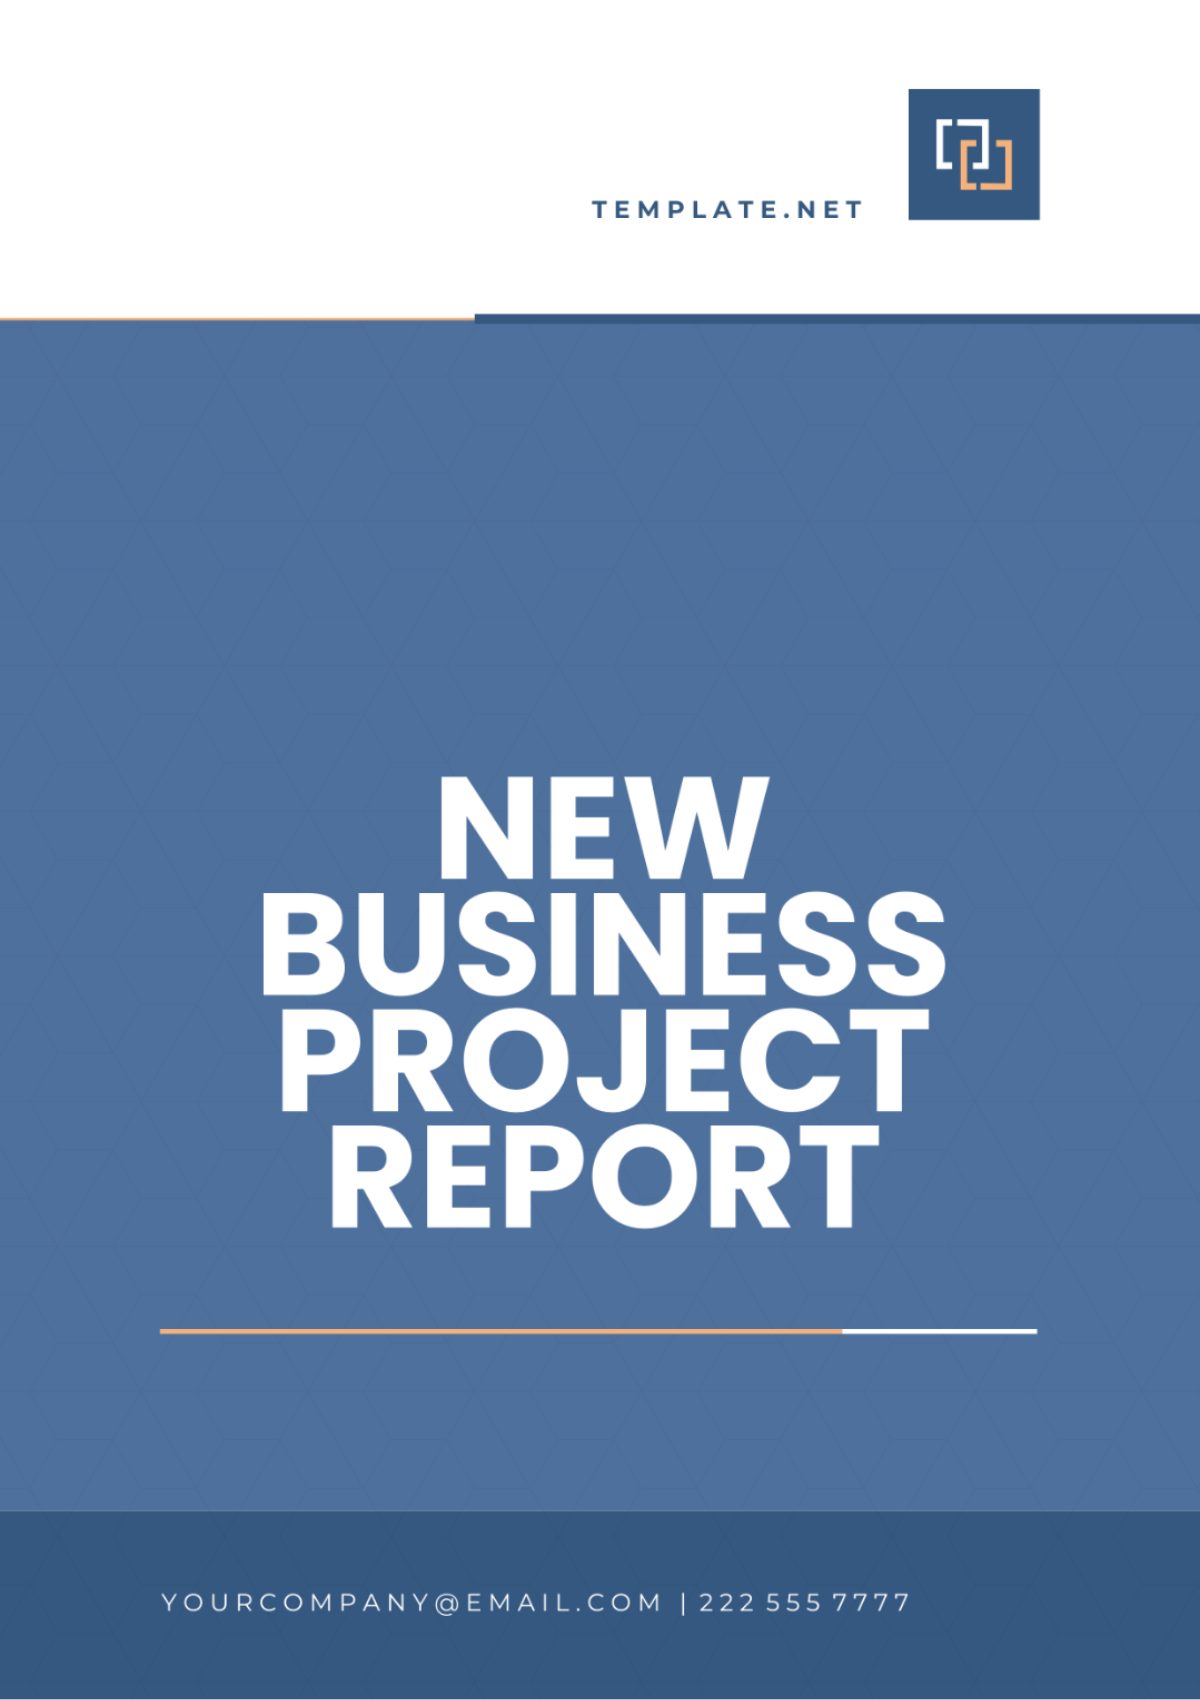 New Business Project Report Template